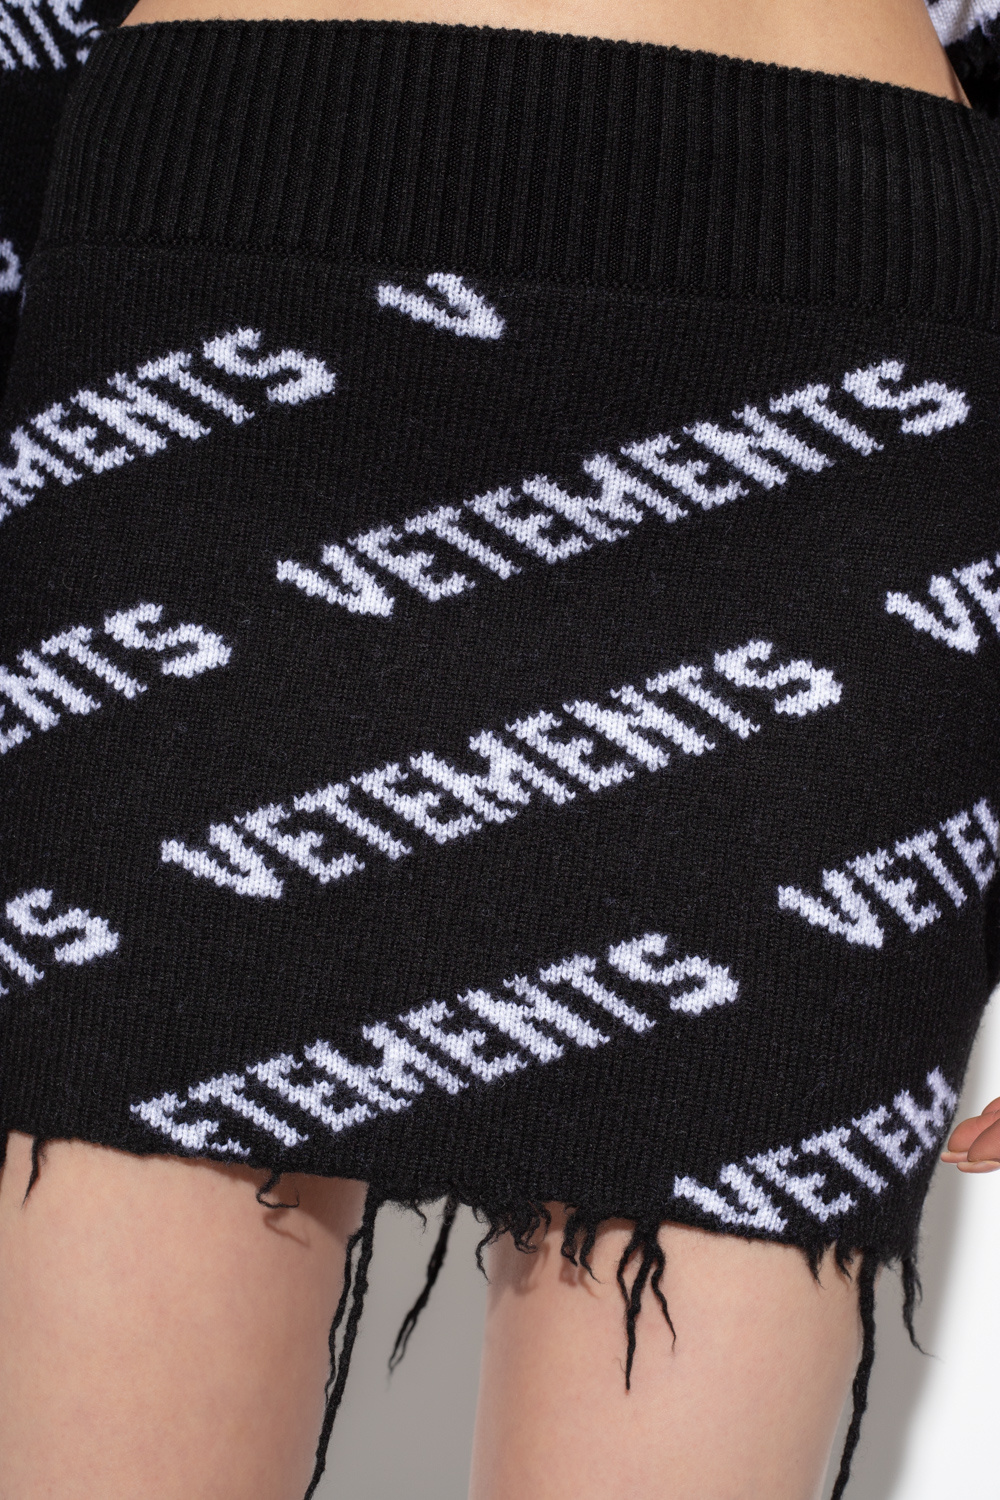 VETEMENTS STYLISH MODELS FOR THE MOST DEMANDING WEDDING GUESTS